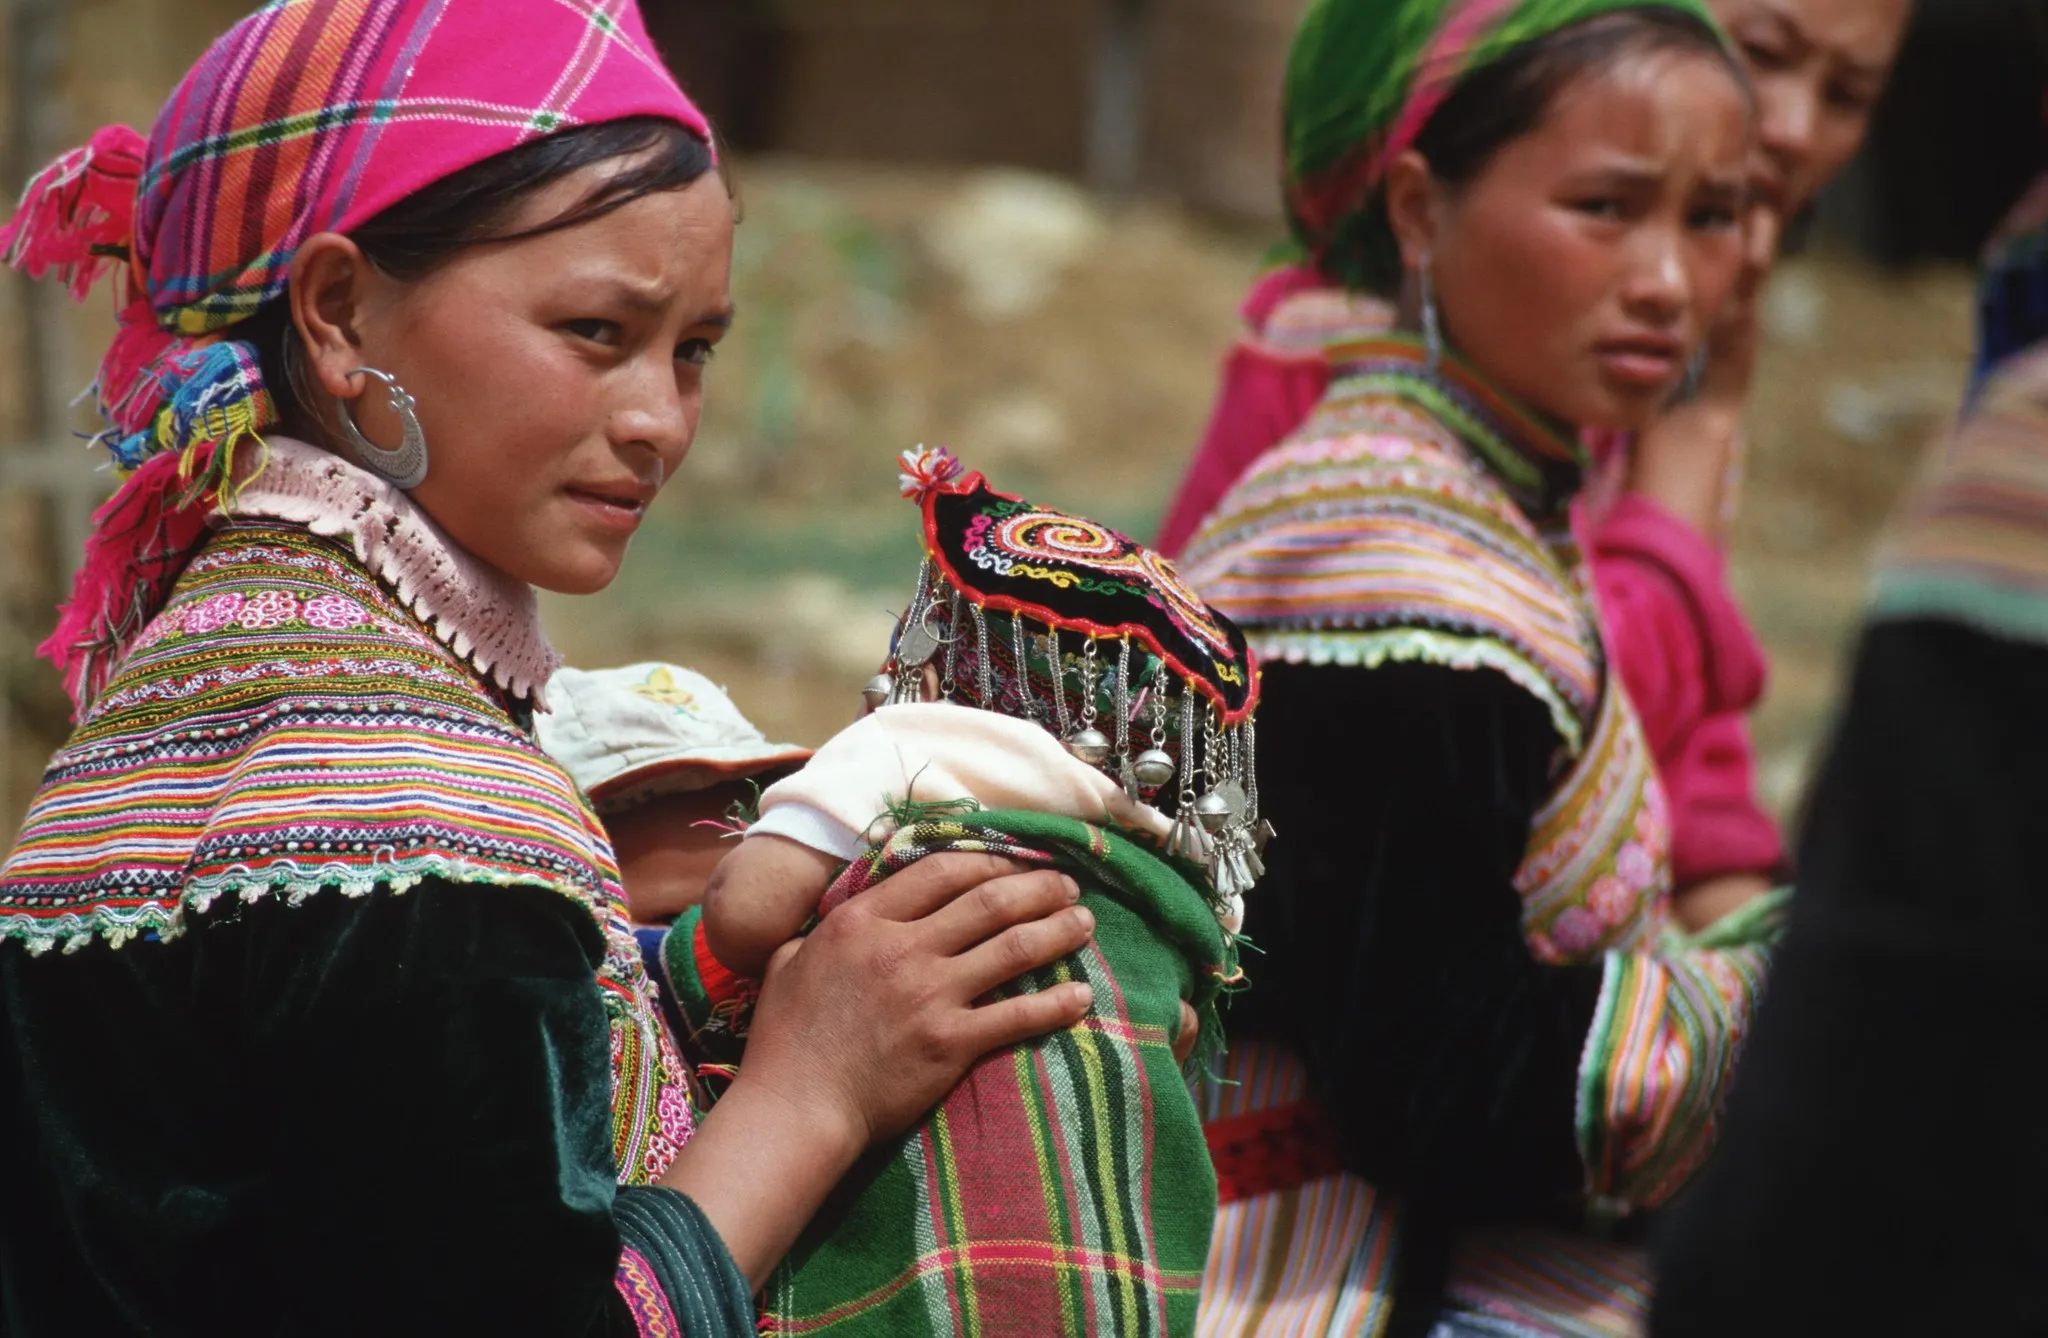 Flower Hmong Woman with child 